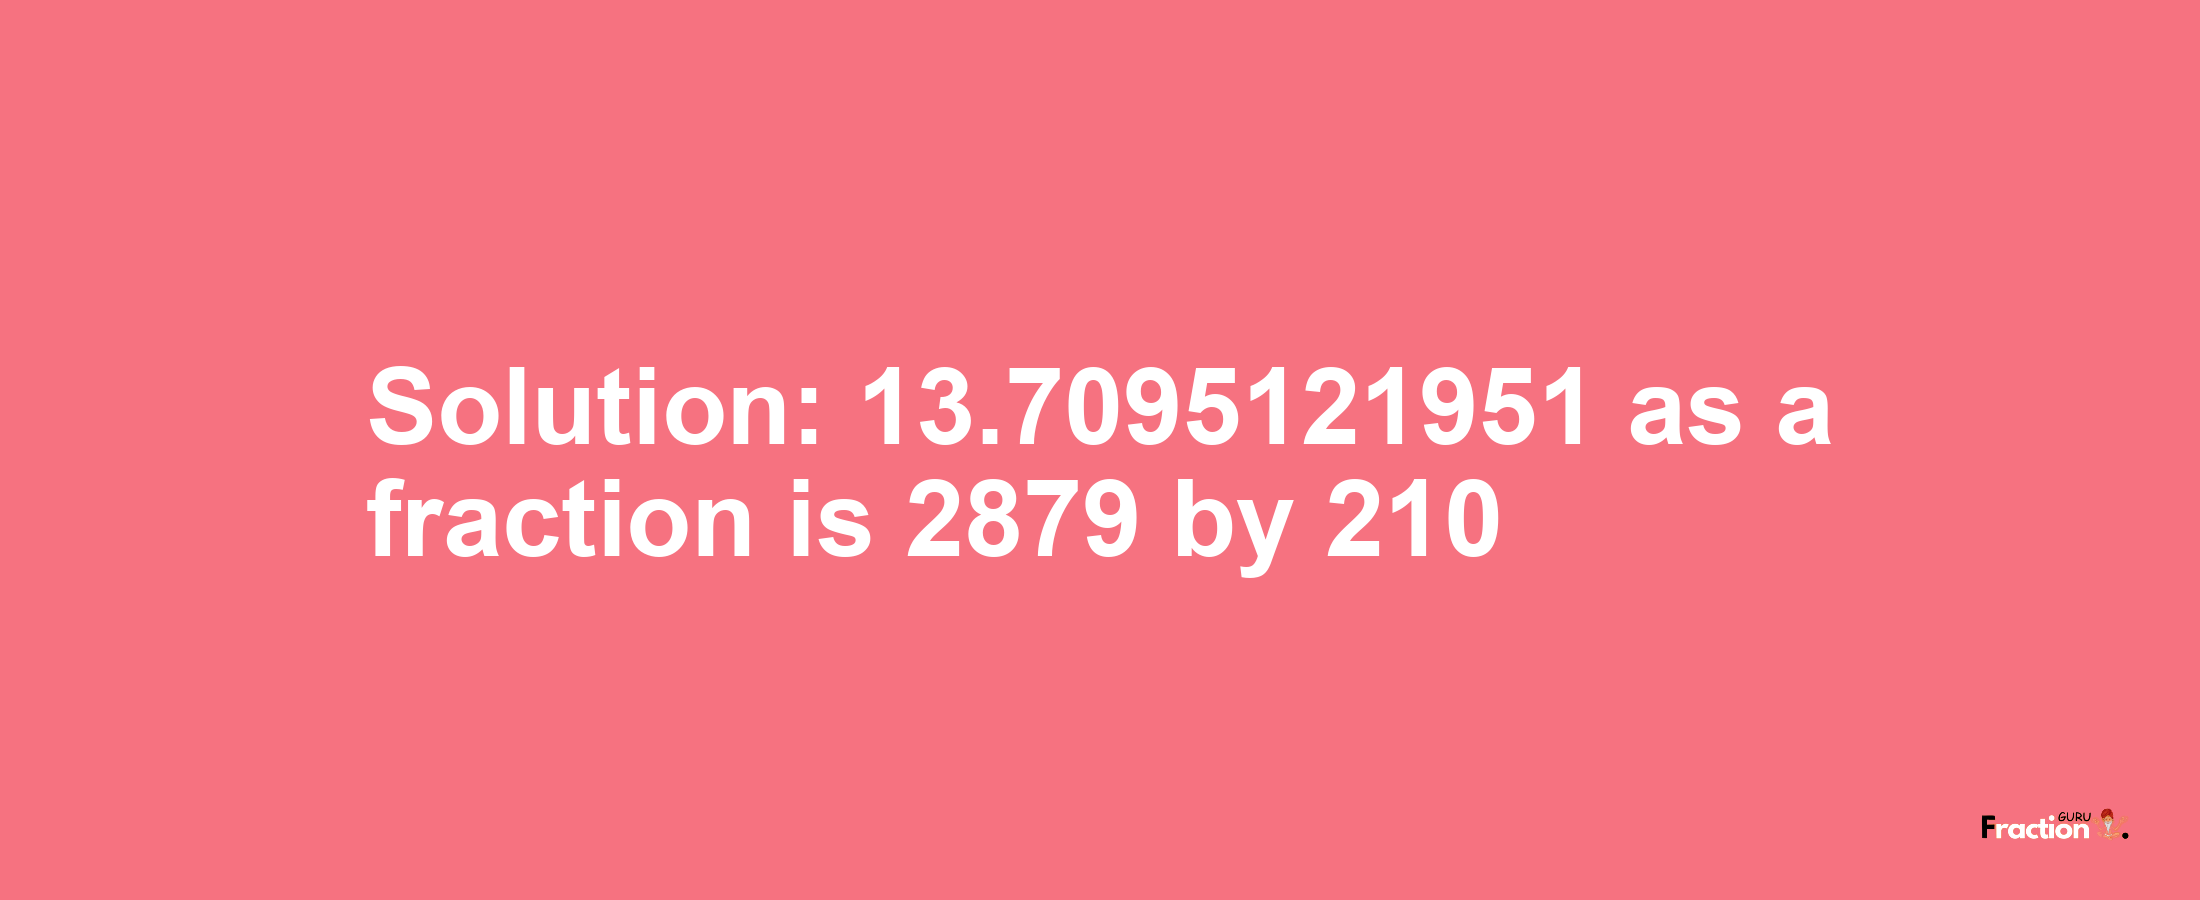 Solution:13.7095121951 as a fraction is 2879/210